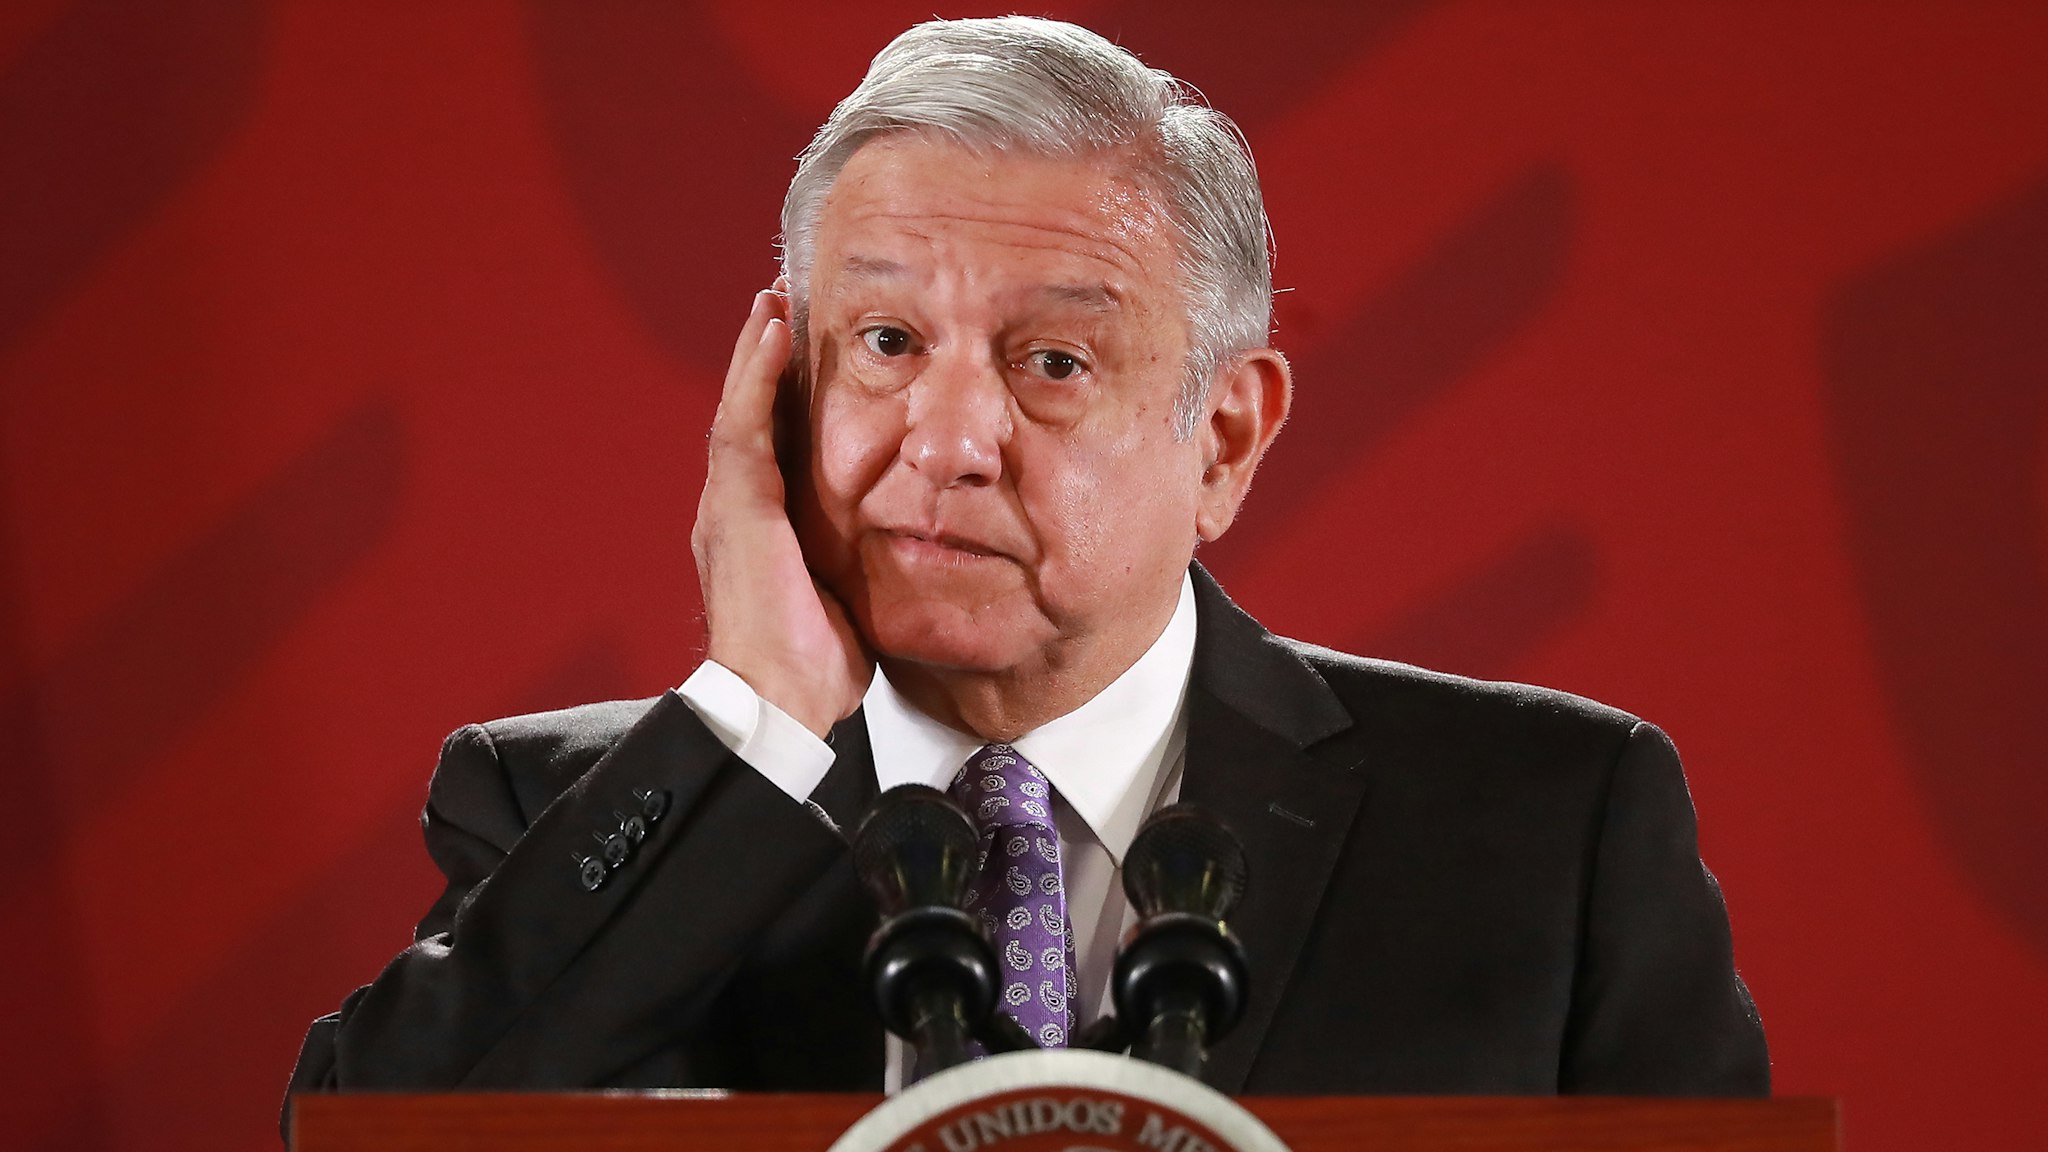 President of Mexico Andres Manuel Lopez Obrador gestures during the Presidential Daily Morning Briefing on November 13, 2019 in Mexico City, Mexico. Lopez Obrador gave details about the asylum granted to Former President of Bolivia Evo Morales Ayma after Mexican government acknowledged a coup and demanded respect for the constitution and democracy in Bolivia.